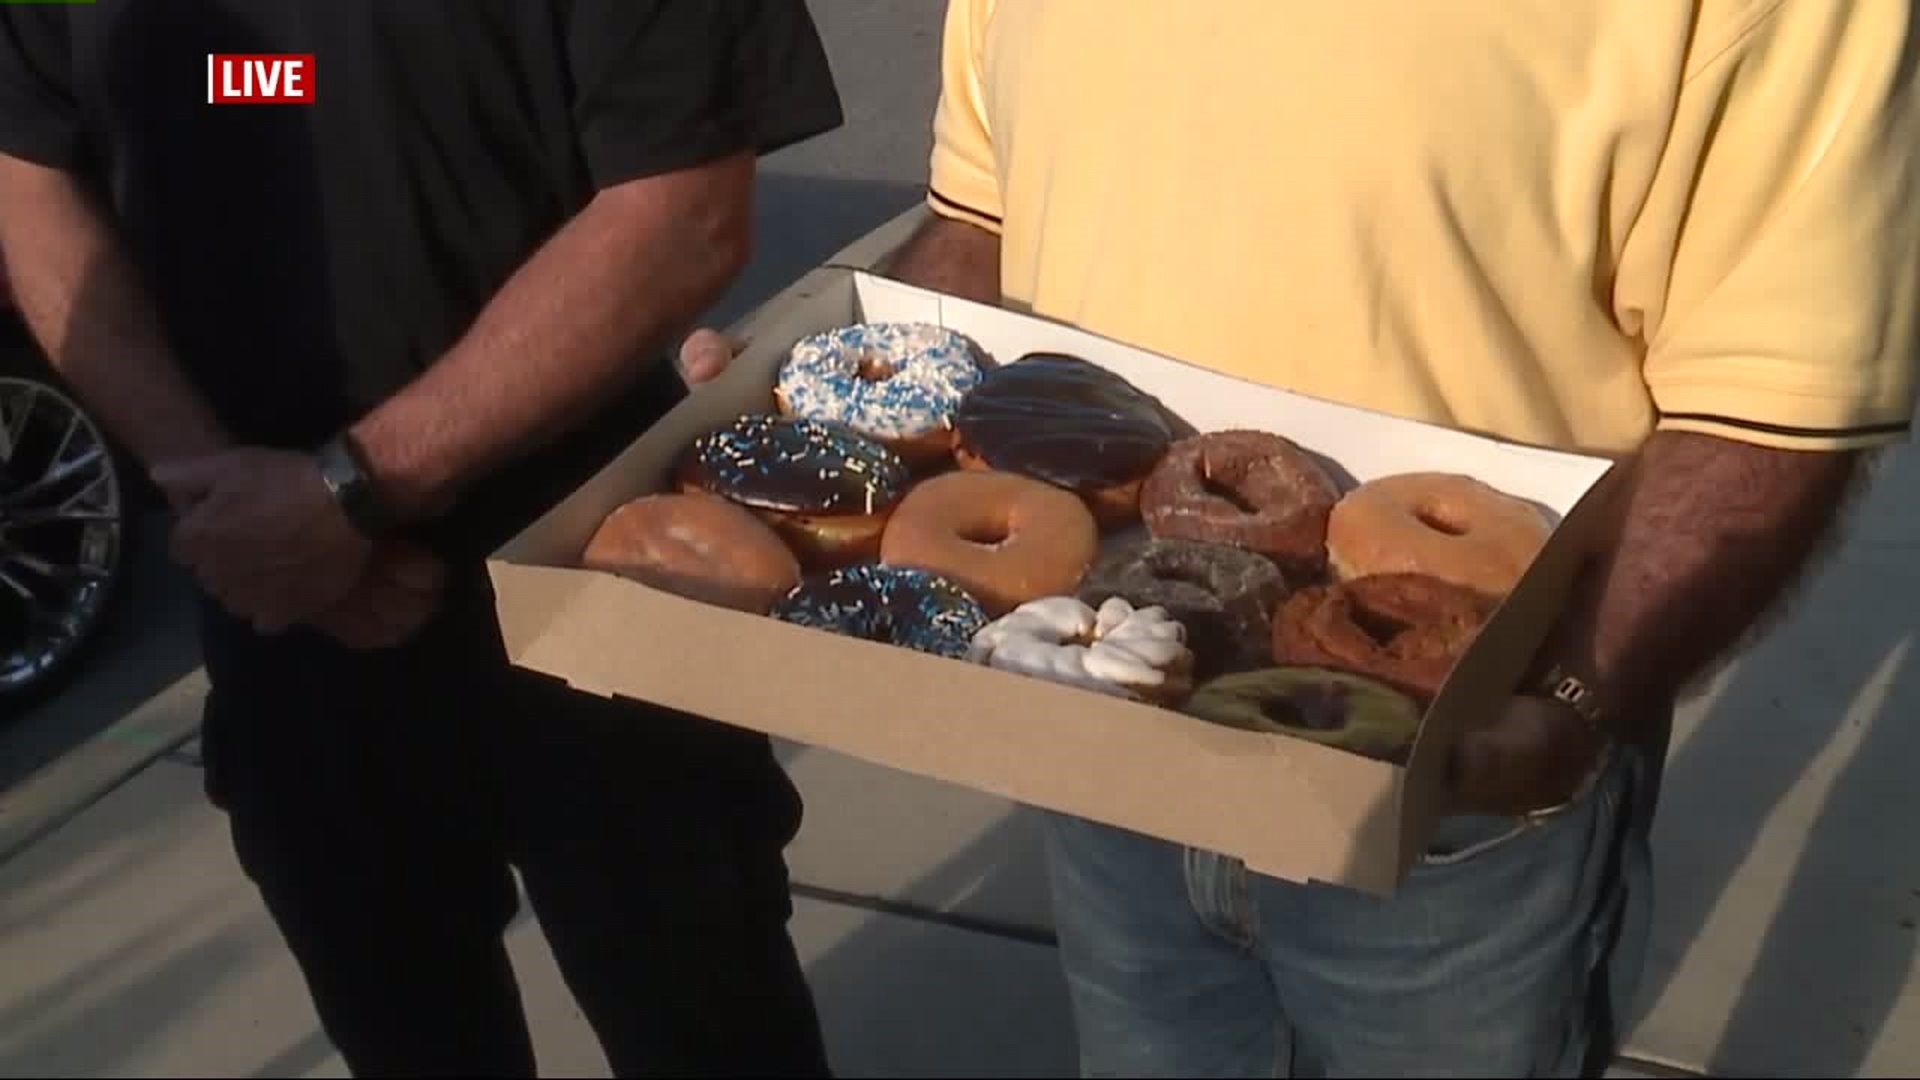 Local corvette club delivers sweet treat to police officers